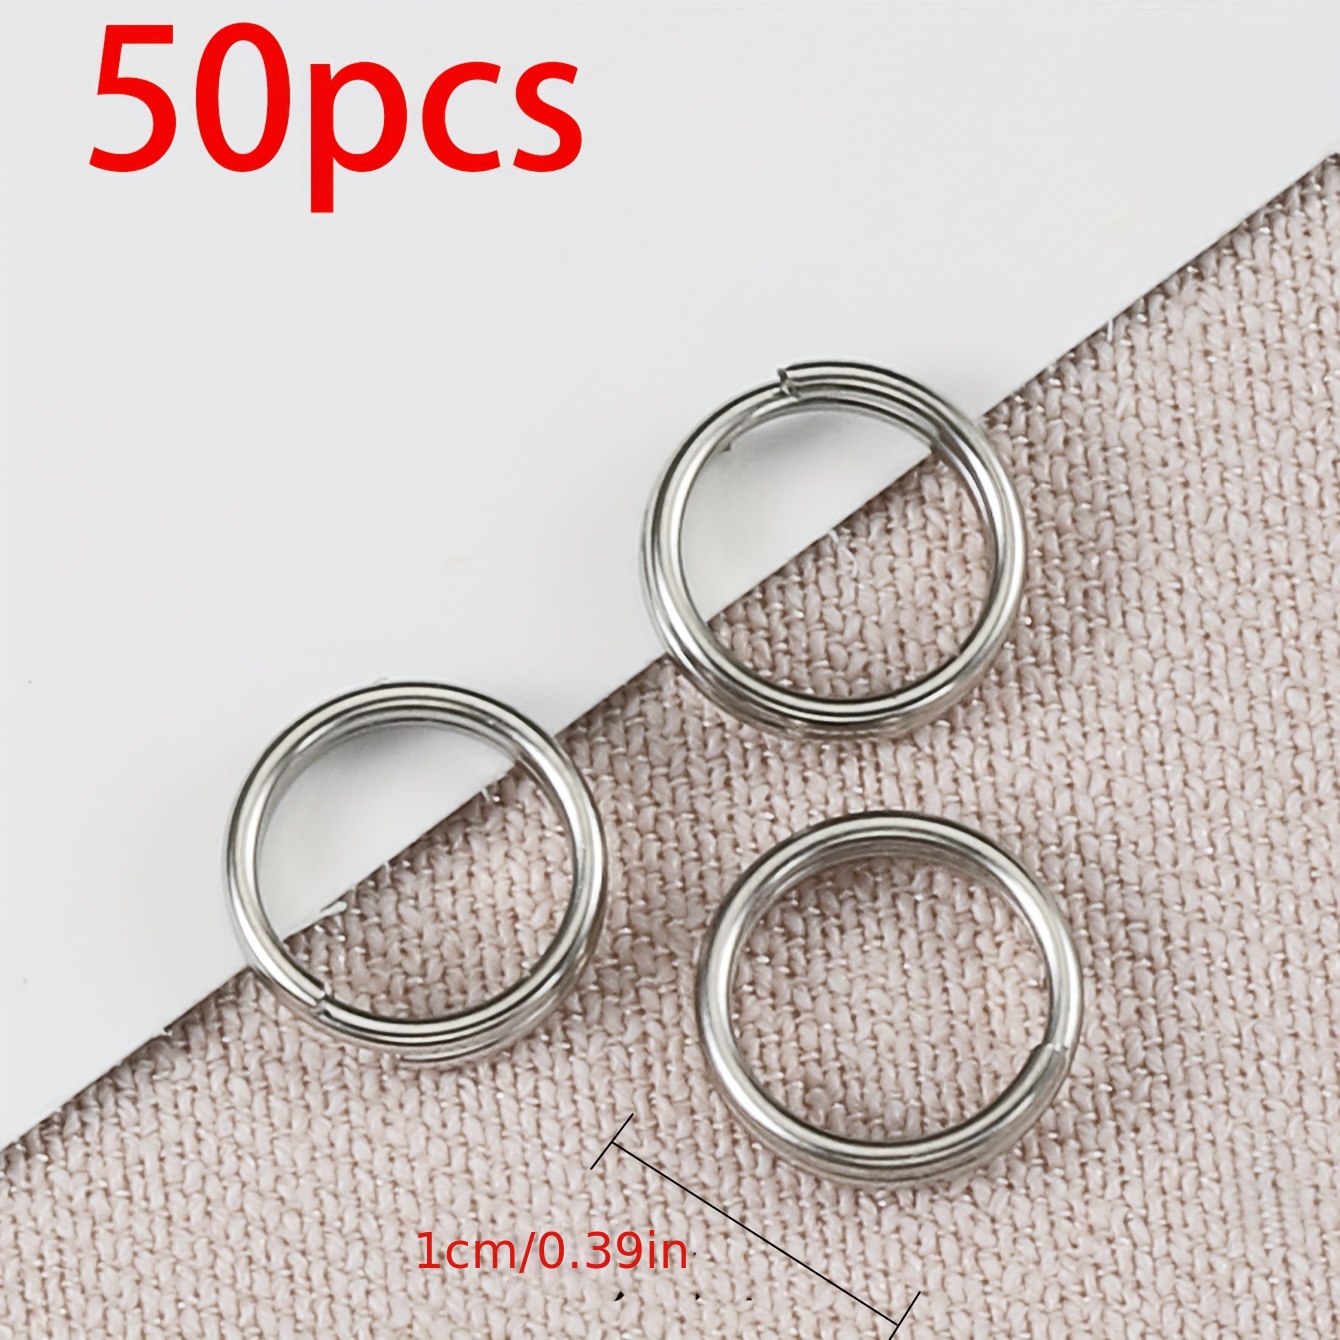 5-50pcs 304 Stainless Steel Key Ring Key Chain Keyrings Keychain Key Holder  Split Ring for Jewelry Making (Color : Steel, Size : 30mm 20pcs)